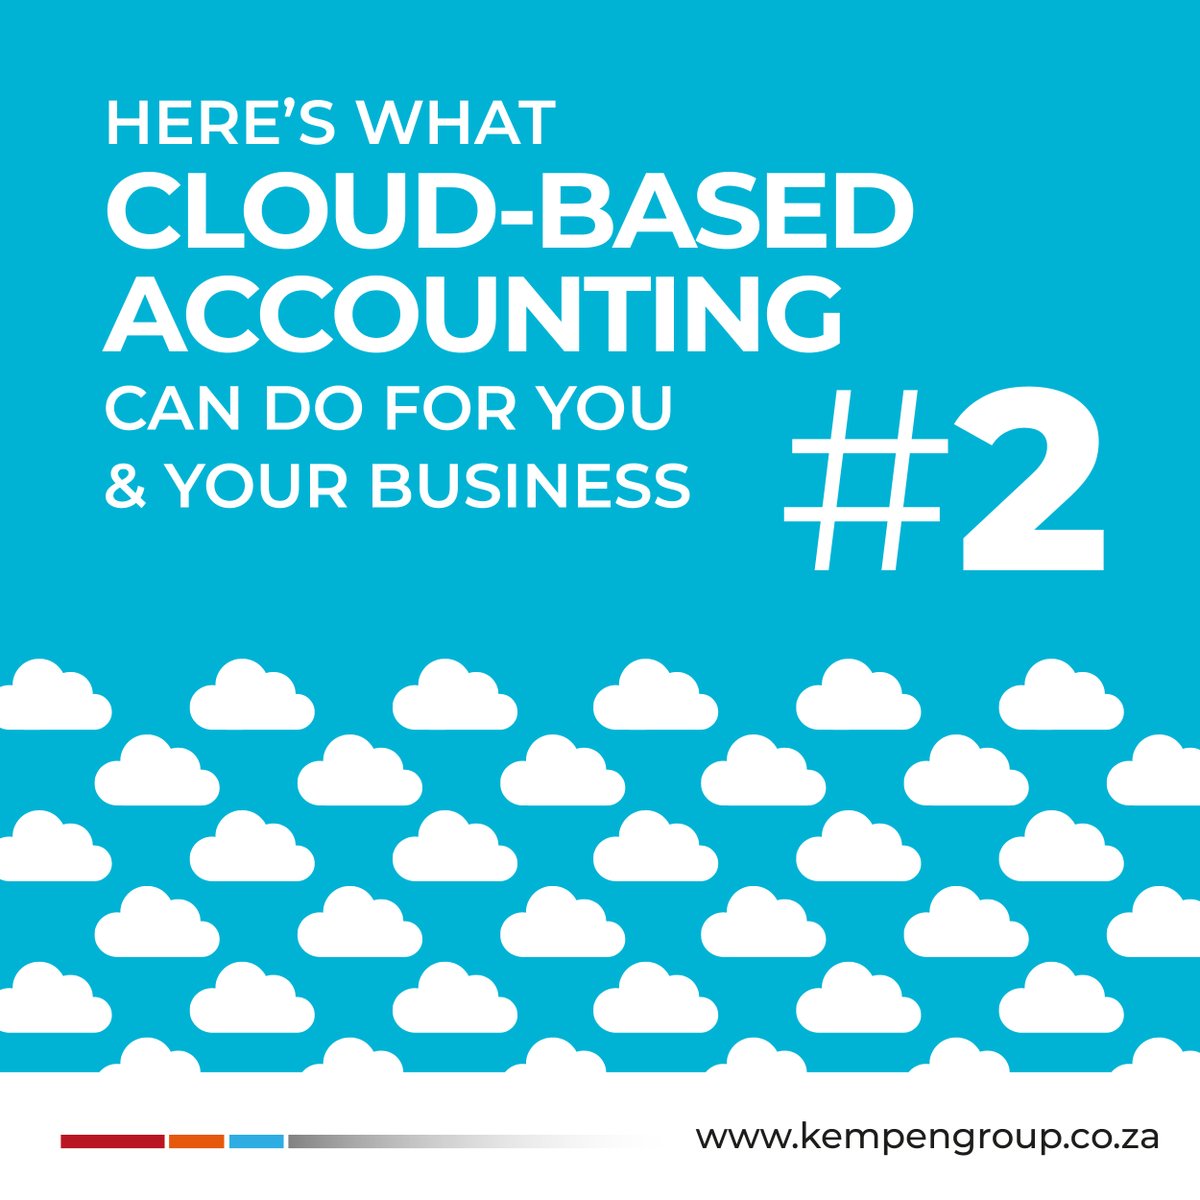 Tired of spending hours on manual data entry & reconciliations? Switch to #cloudbasedaccounting & automate your financial processes, saving time & reducing errors.

We can show you how.
📱082 940 6700
📧ignus@kempengroup.co.za

#KempenOnline #KempenGroup #OnlineAccounting